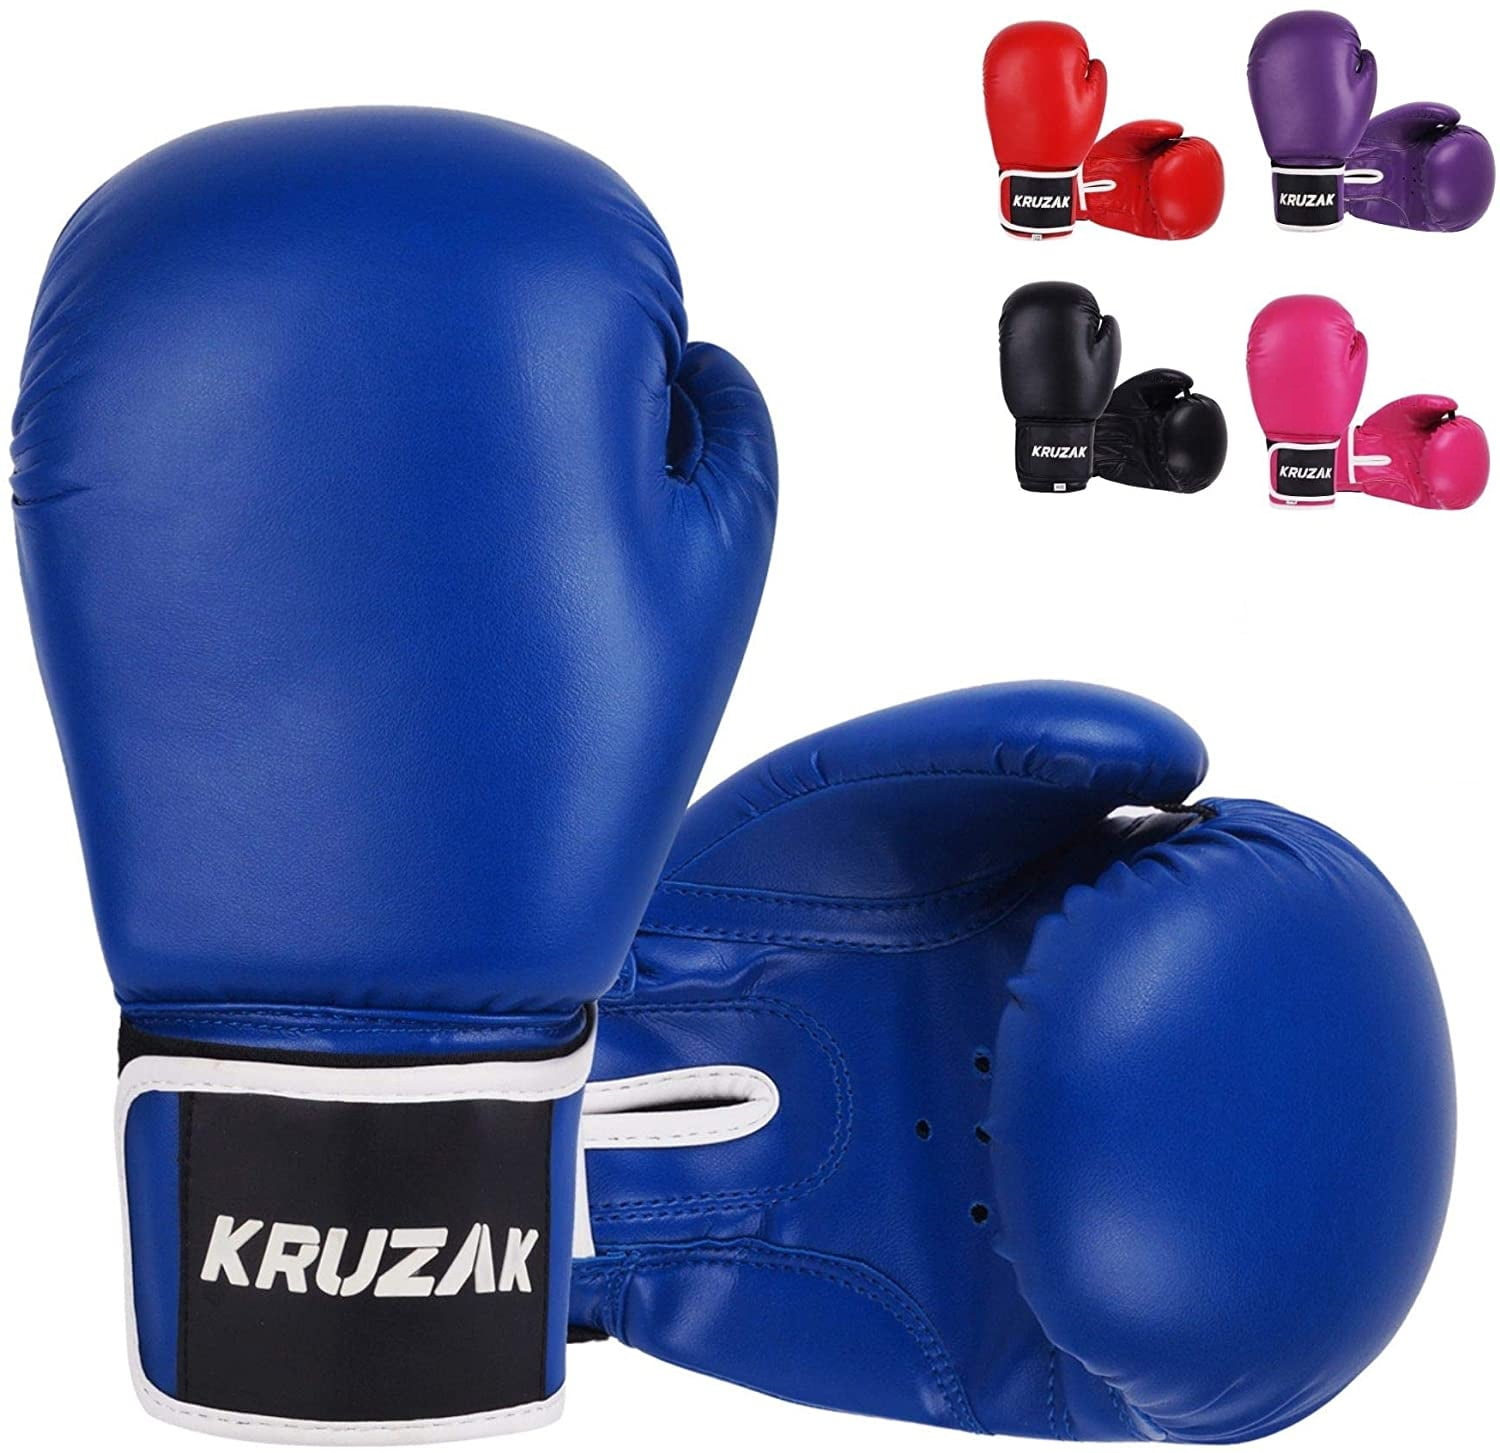 Boxing Focus Pads Hook and Jabs Mitts Gloves Strike Punching Kick Training Mitts 